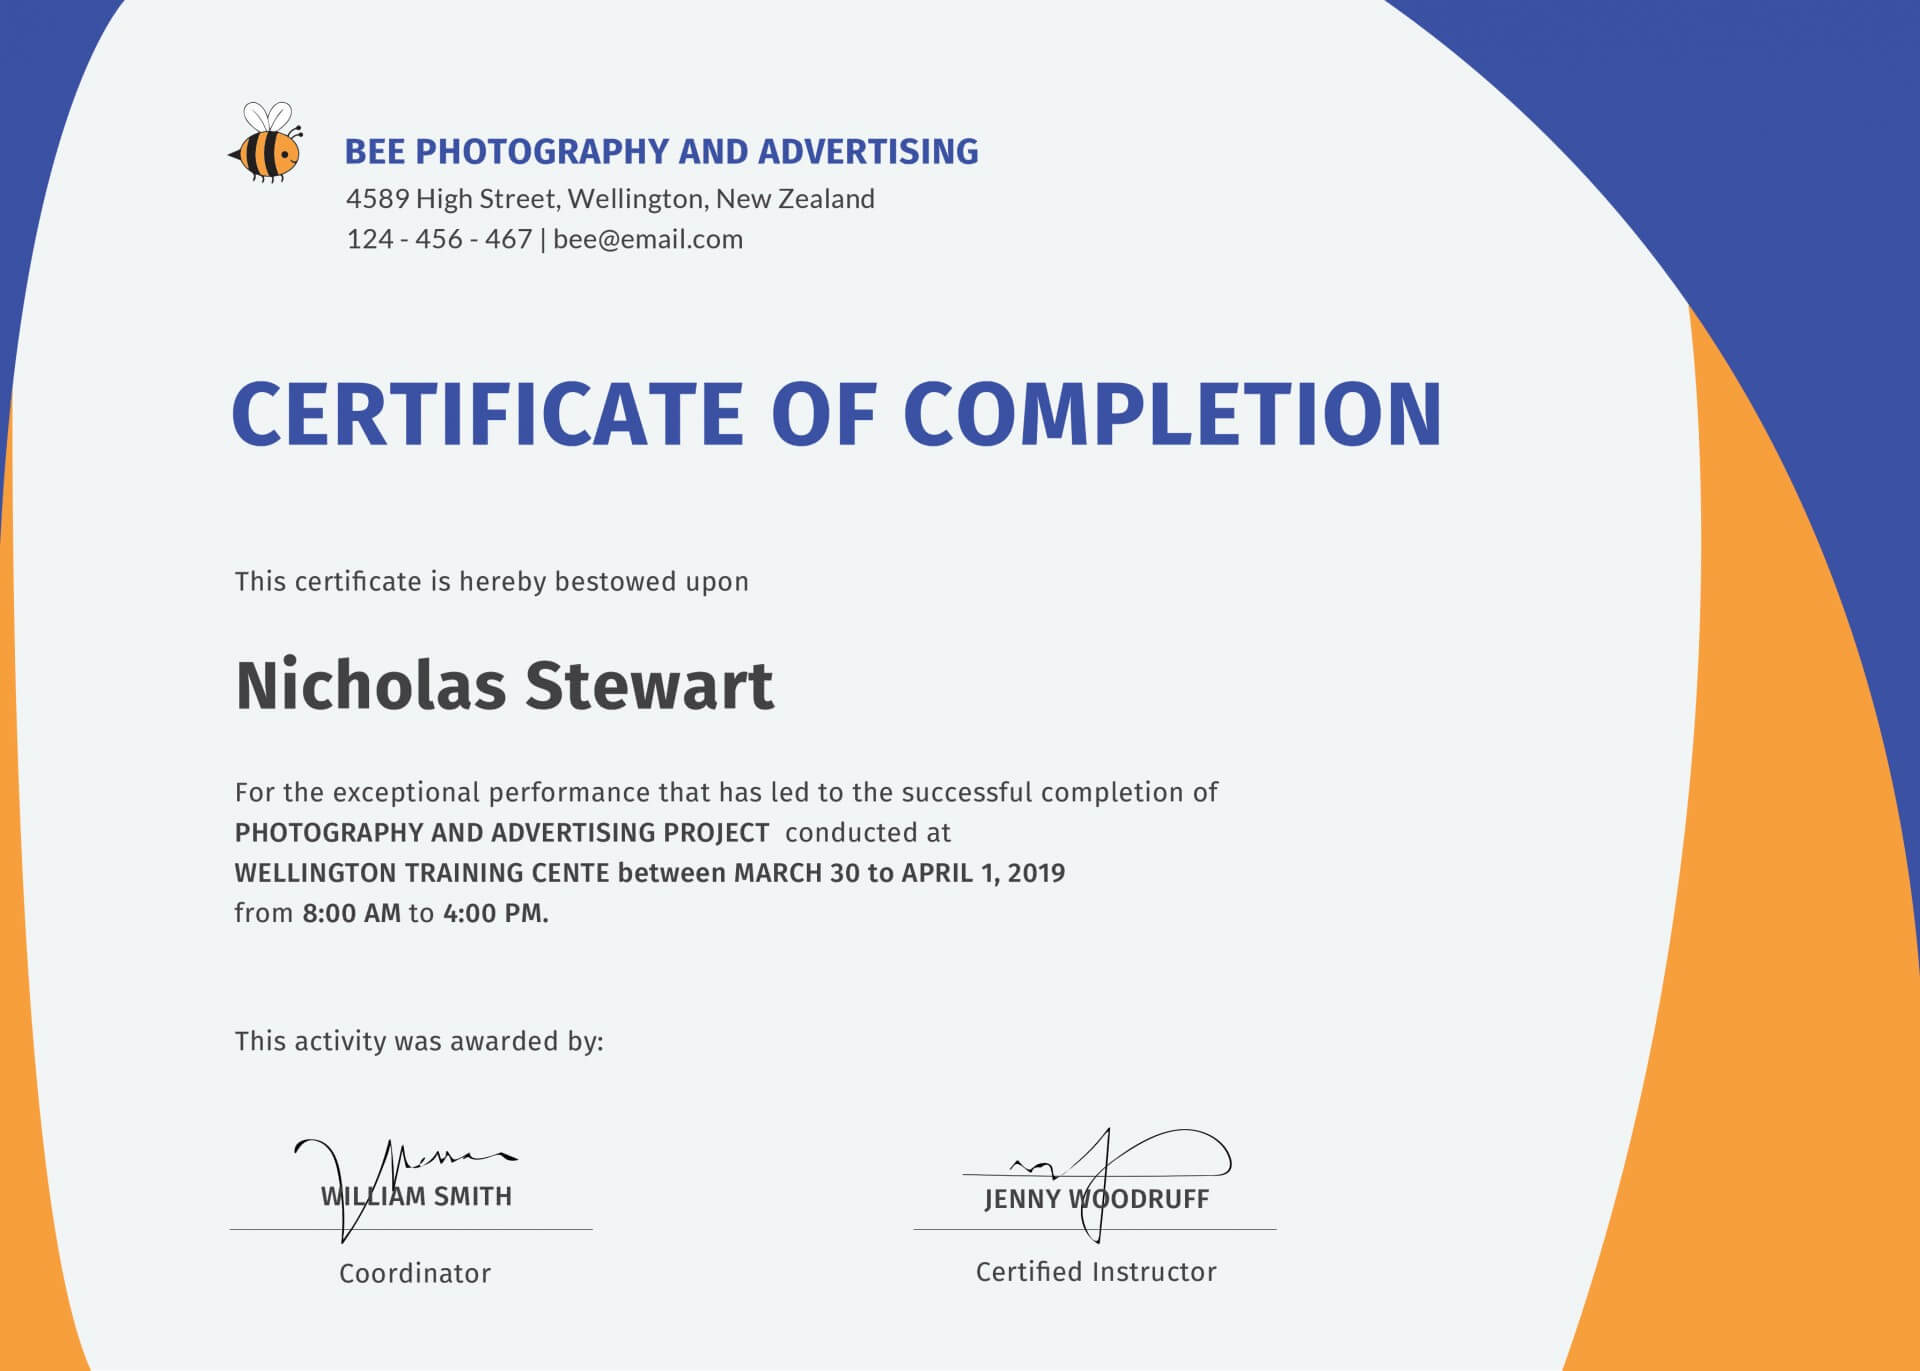 Wondrous Certificate Of Completion Template Ideas Google Within Certificate Template For Project Completion